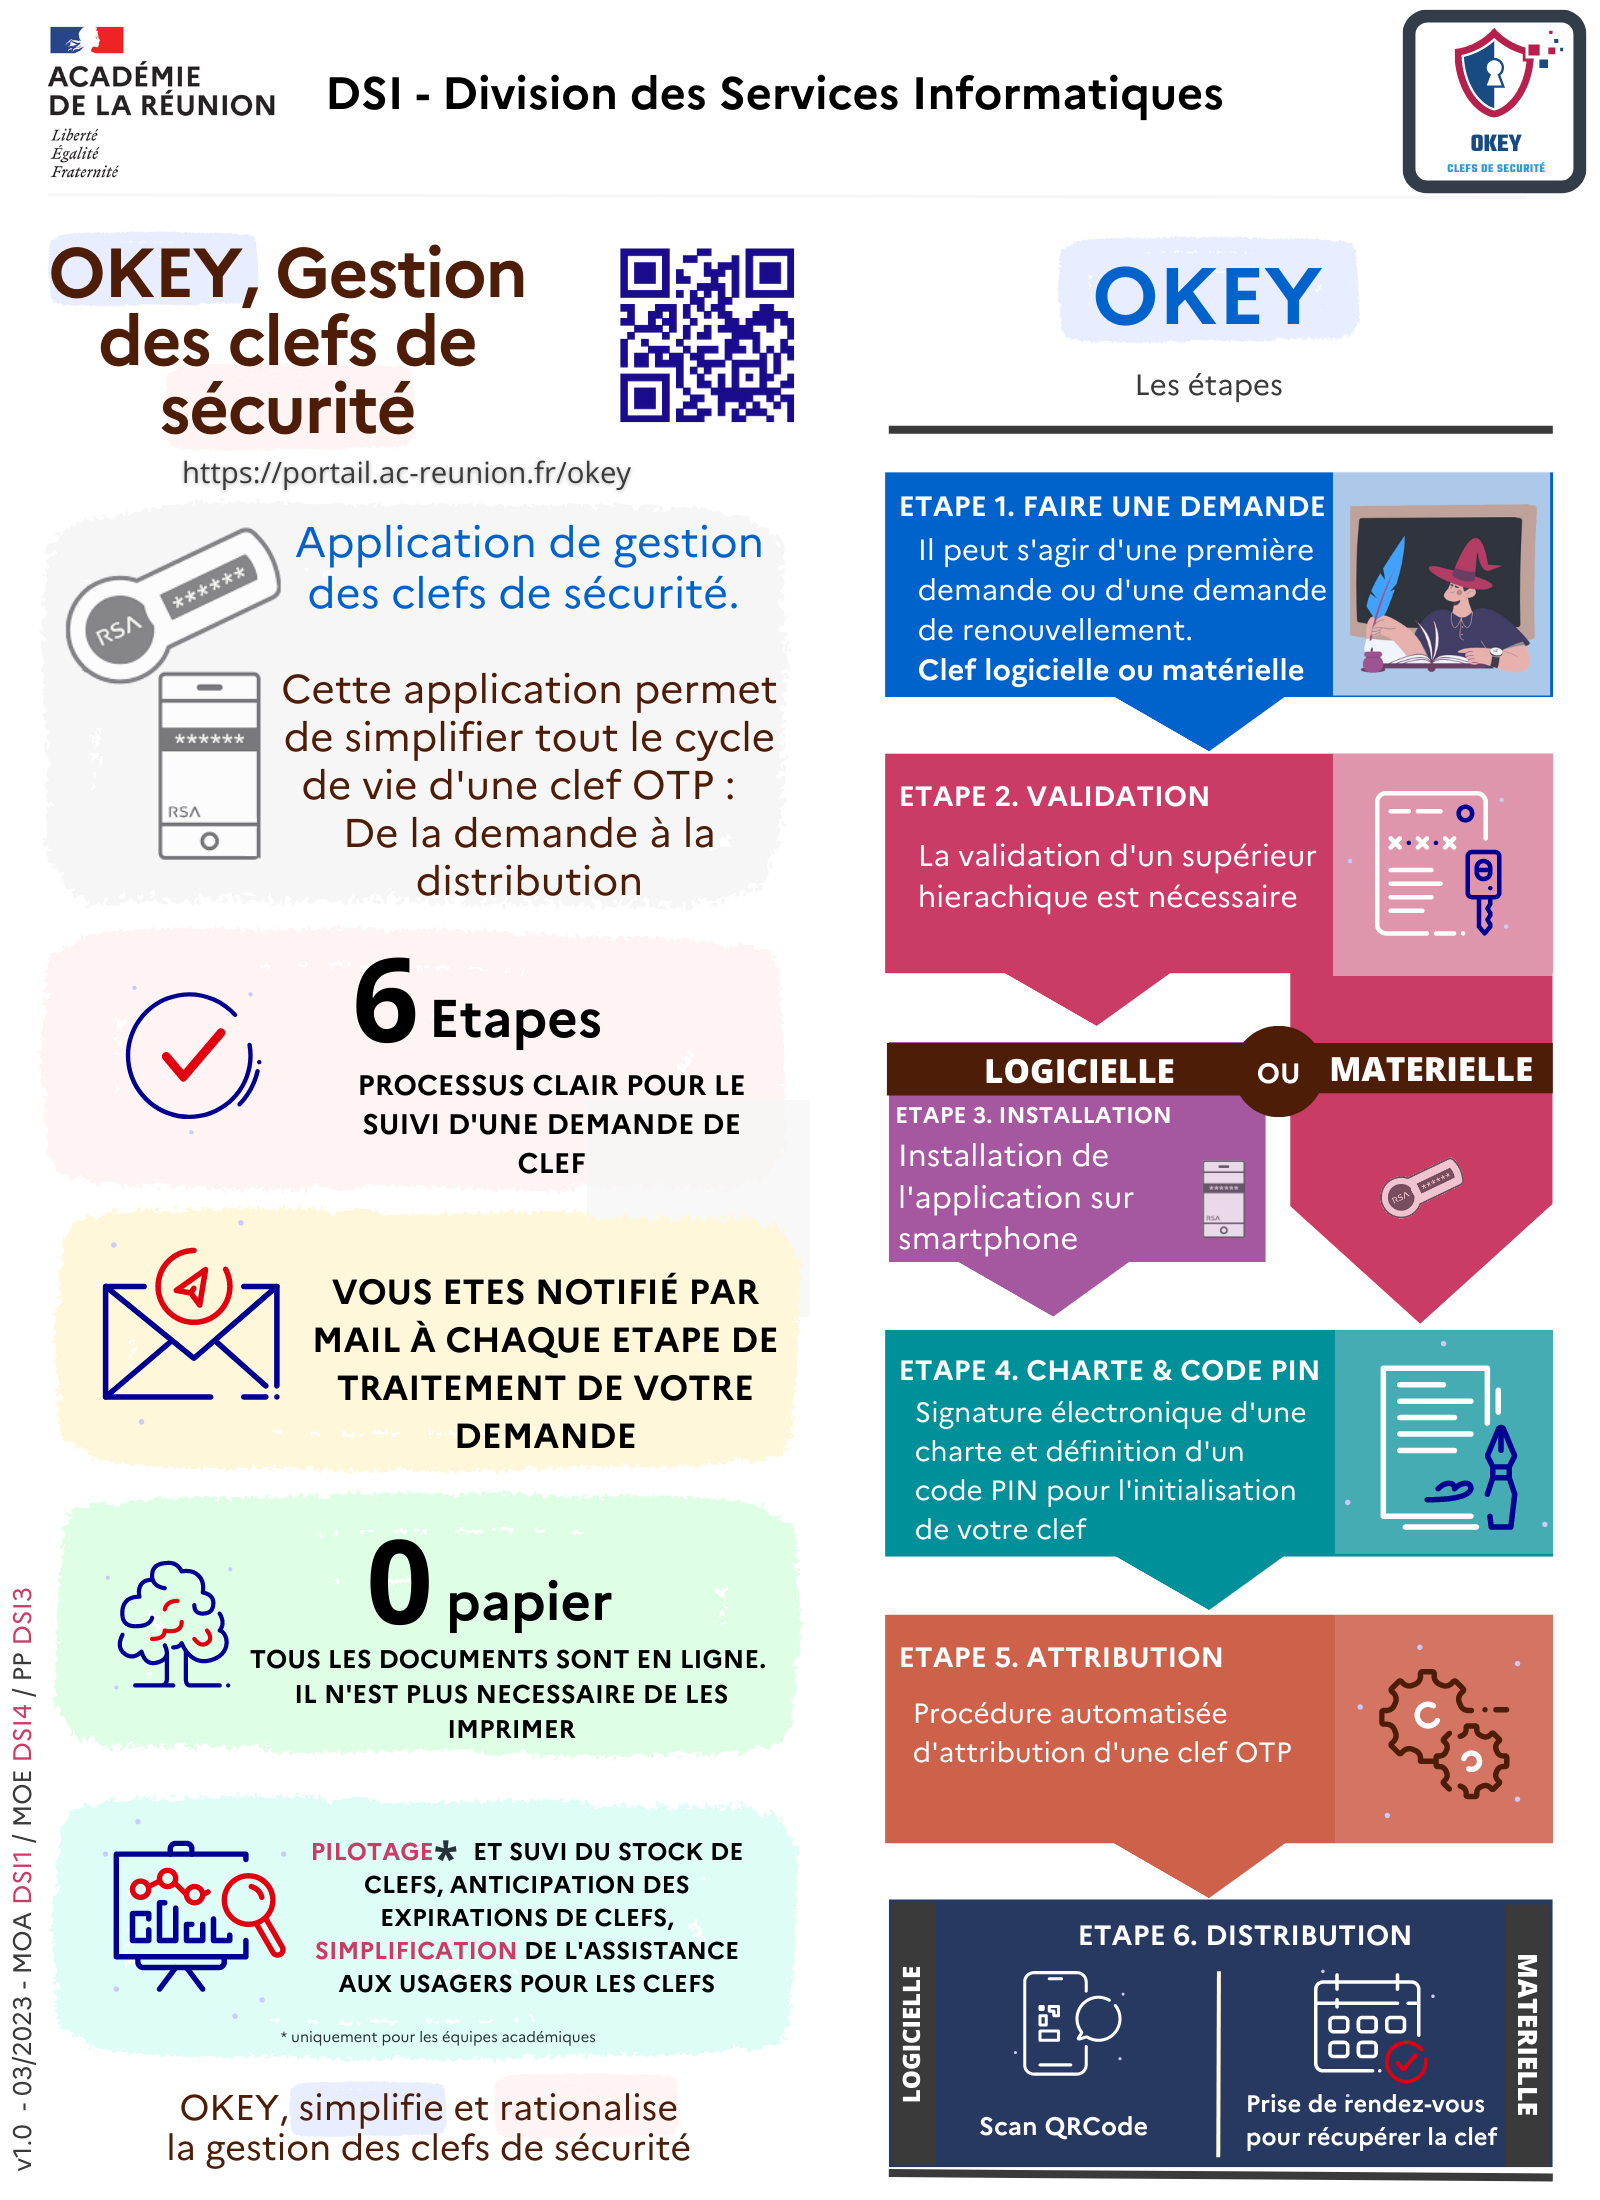 OKEY - INFOGRAPHIE - DSFR.png